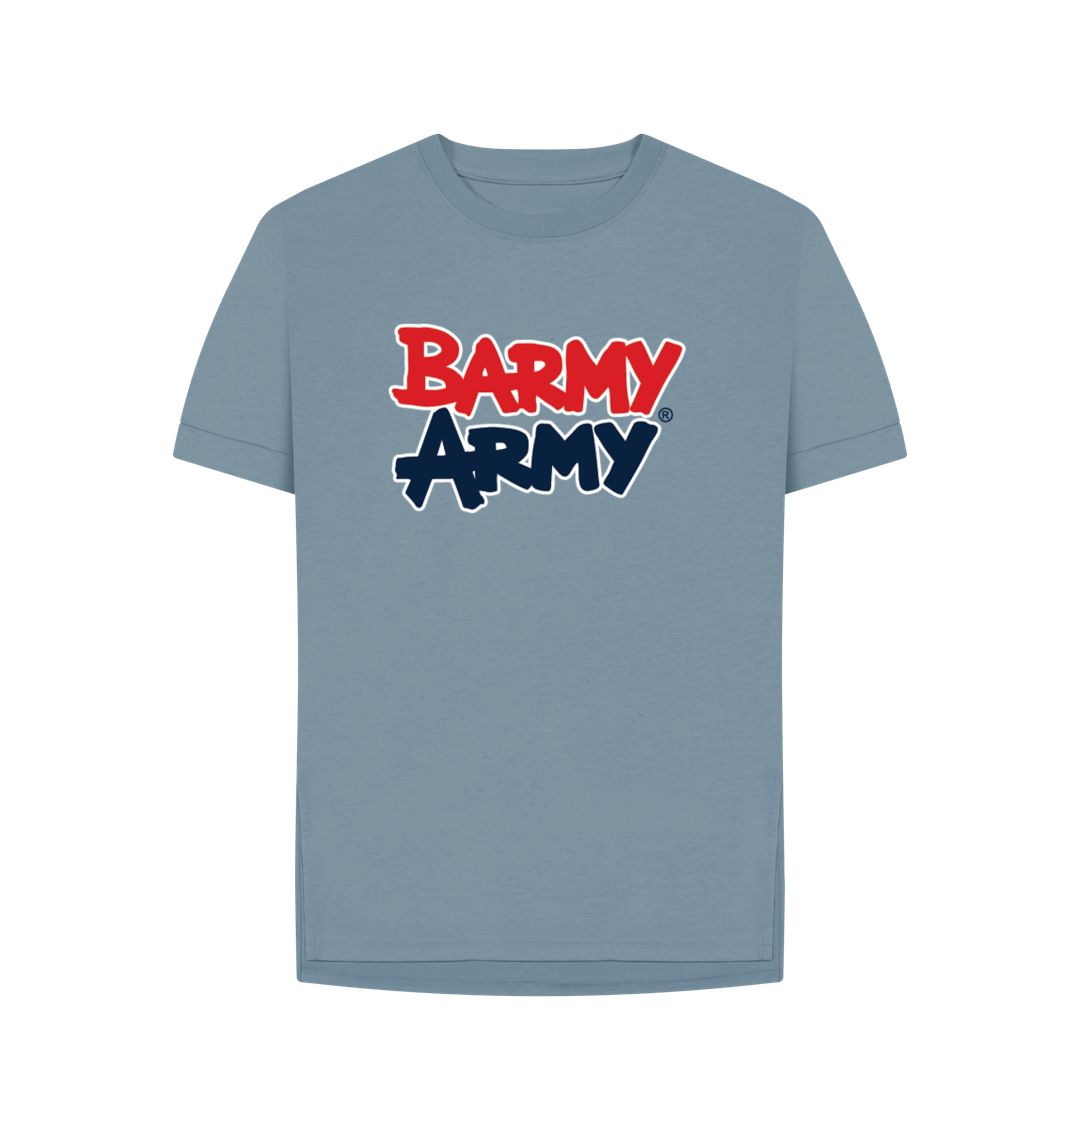 Stone Blue Barmy Army Large Print Relaxed Fit Ladies Tee